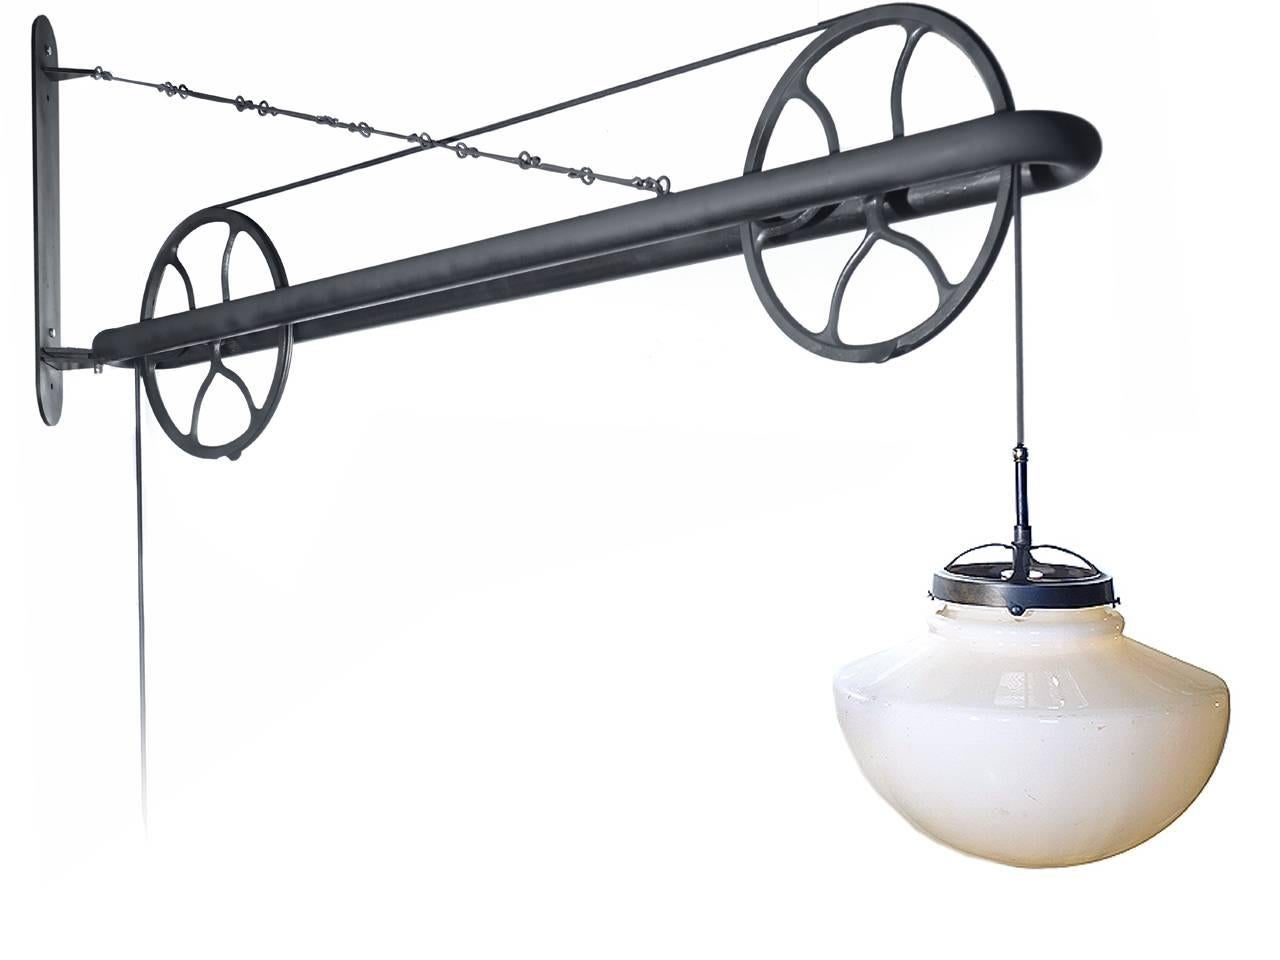 This is an impressive lamp and the proportions are dramatic. This large pulley lamp extends over 70 inches. The wall bracket is 22 inches. It easily swings in a full arc from left to right. The striking 1920s 15 inch diameter milk glass shade has a